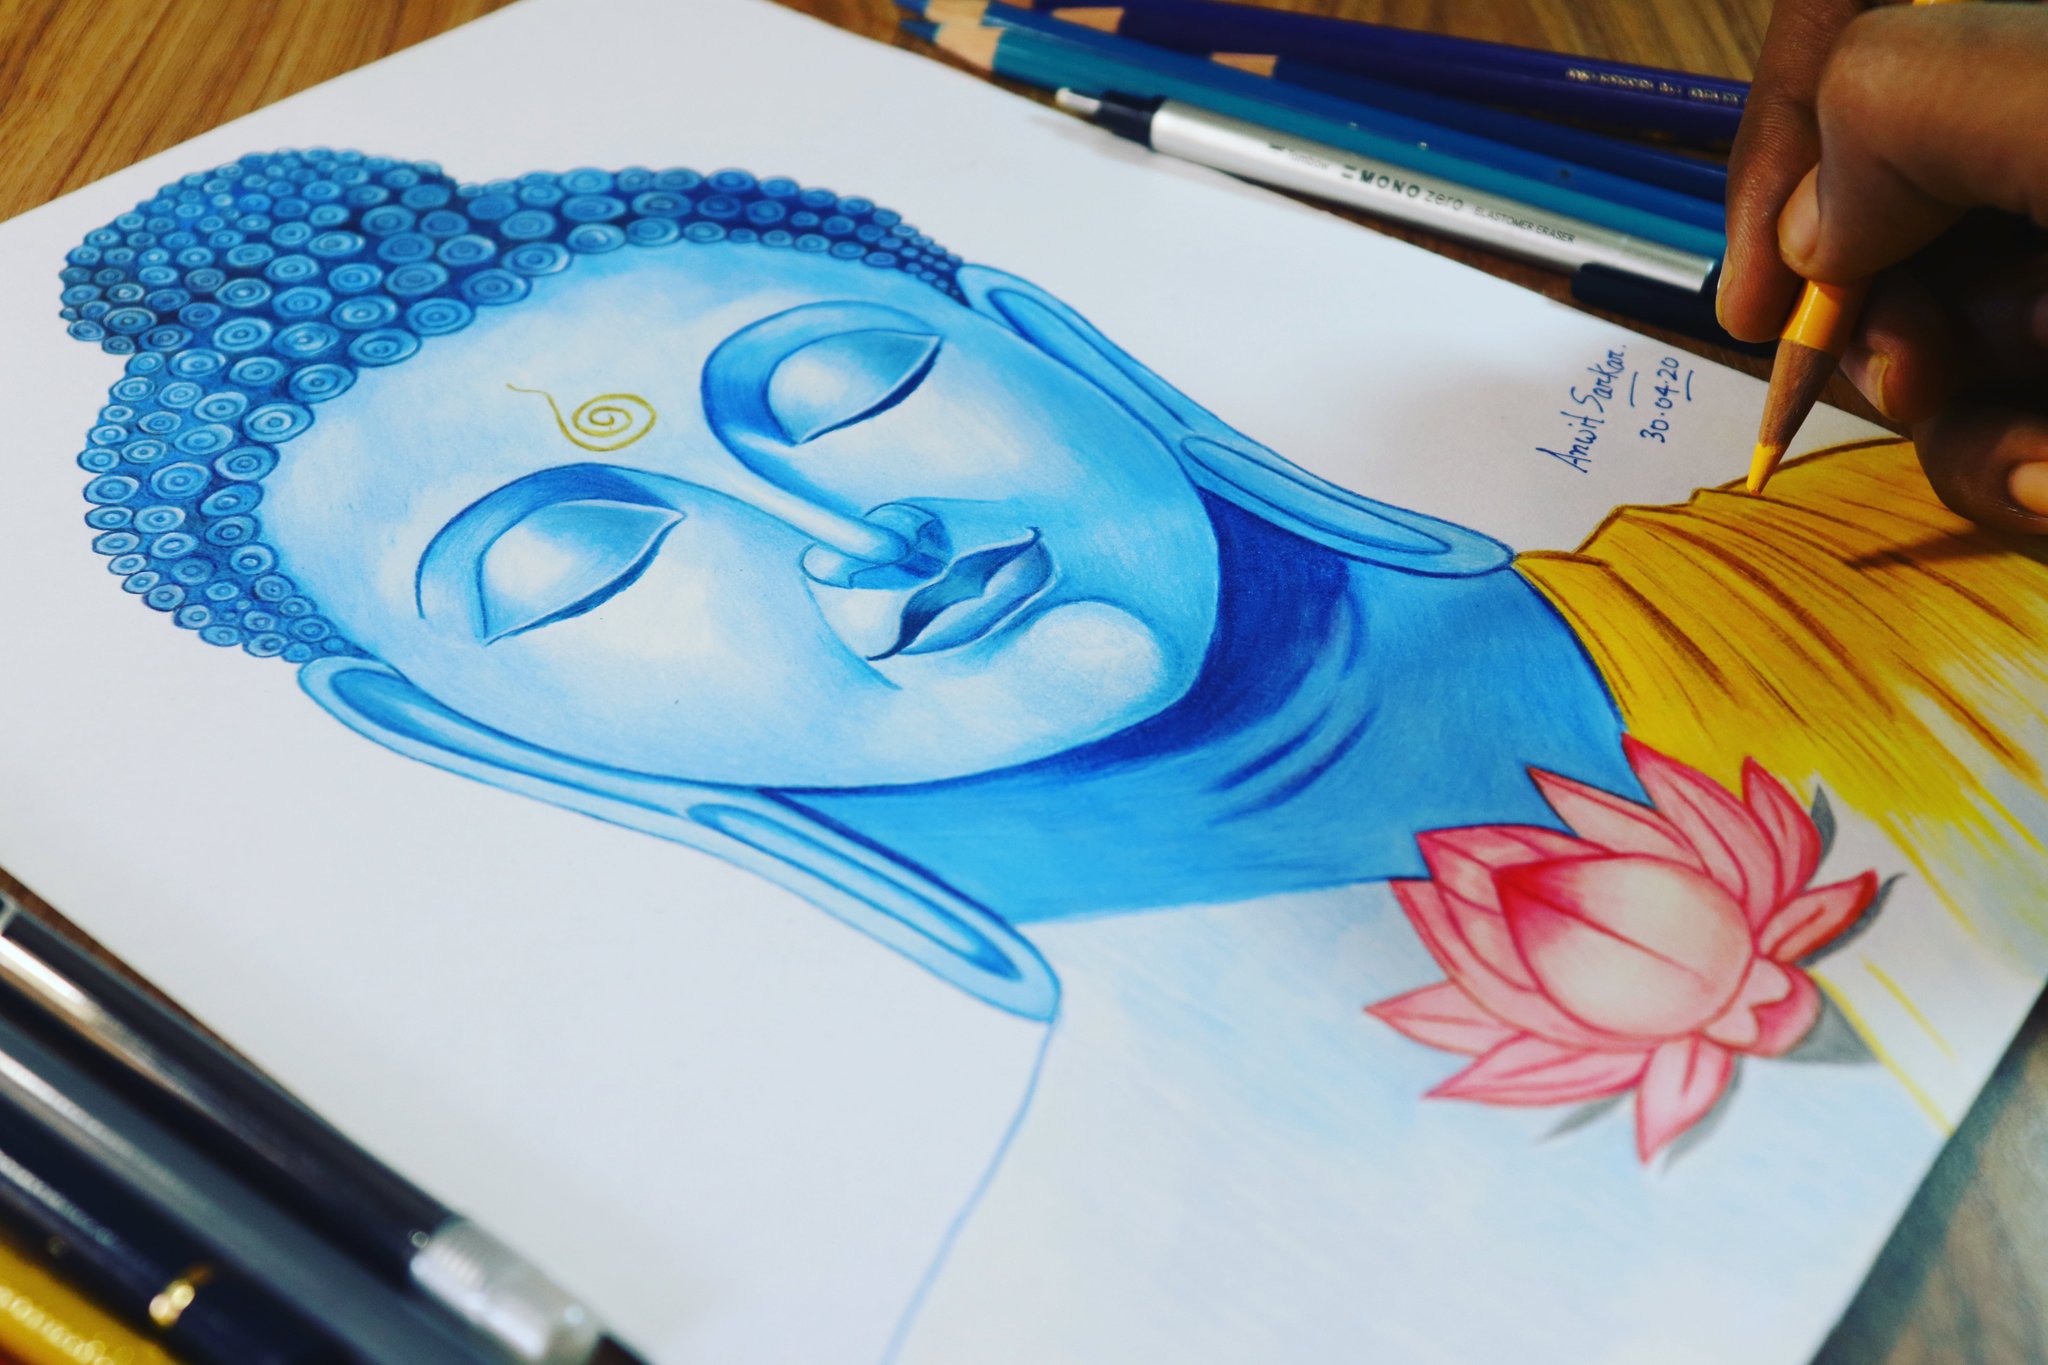 How to draw easy Gautam Buddha pencil drawing step by step - YouTube